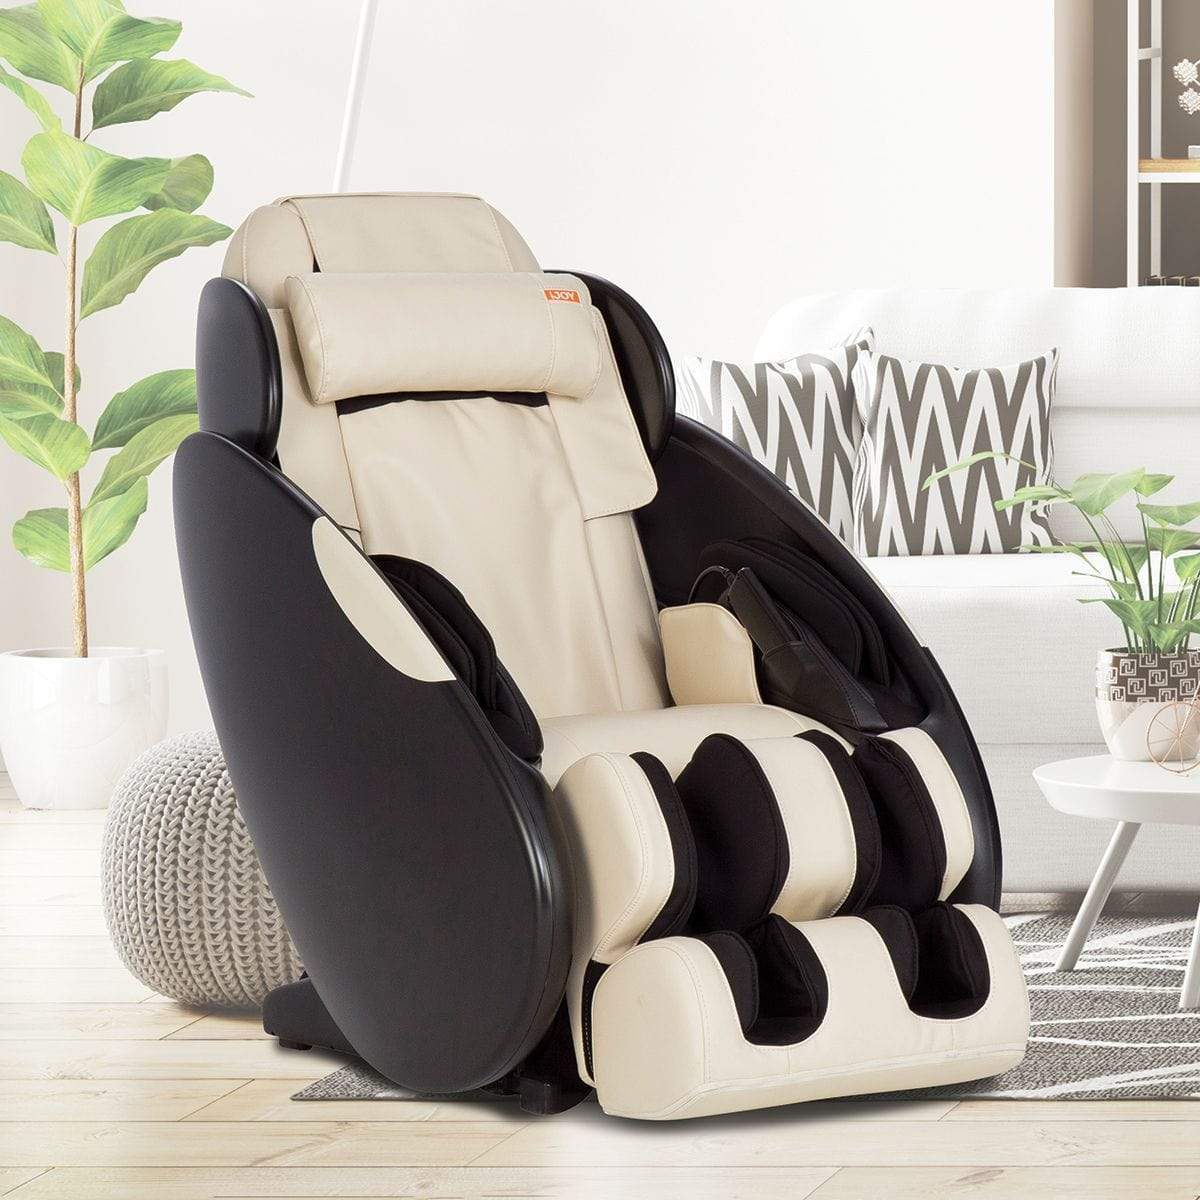 Human TouchMassage ChairHuman Touch iJoy Total Massage ChairBlackMassage Chair Heaven